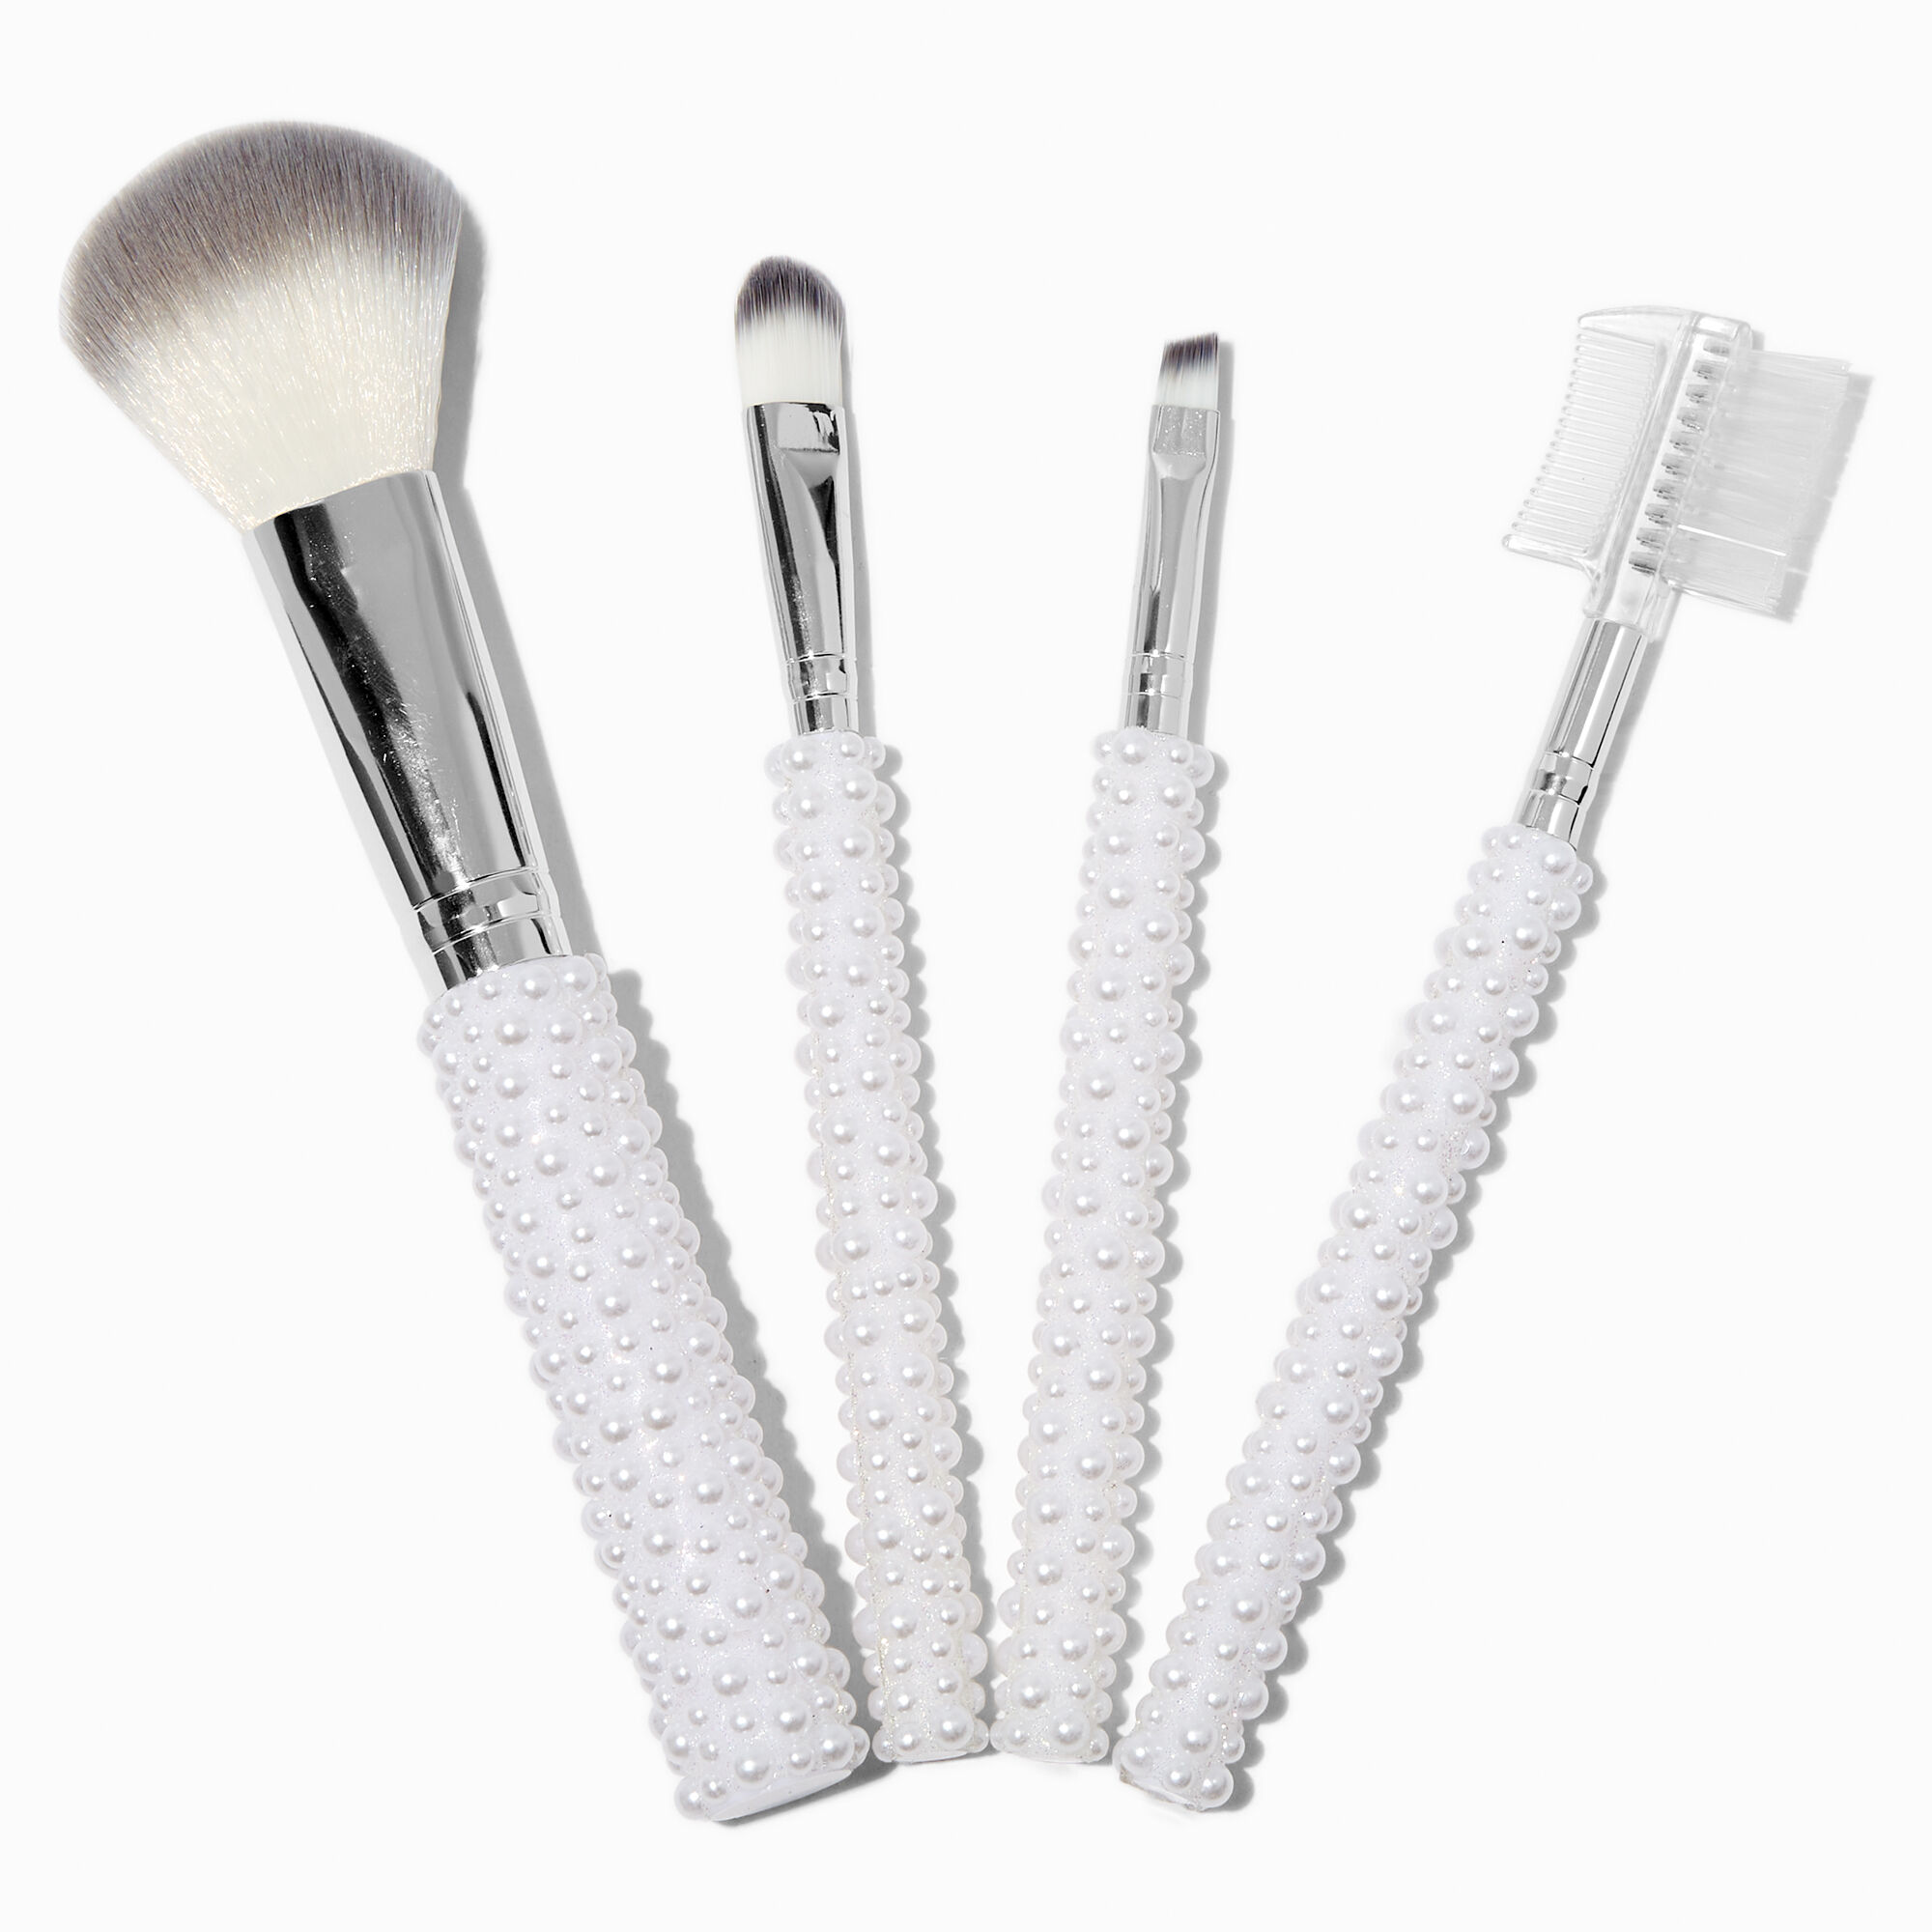 View Claires Pearl Makeup Brush Set 4 Pack information